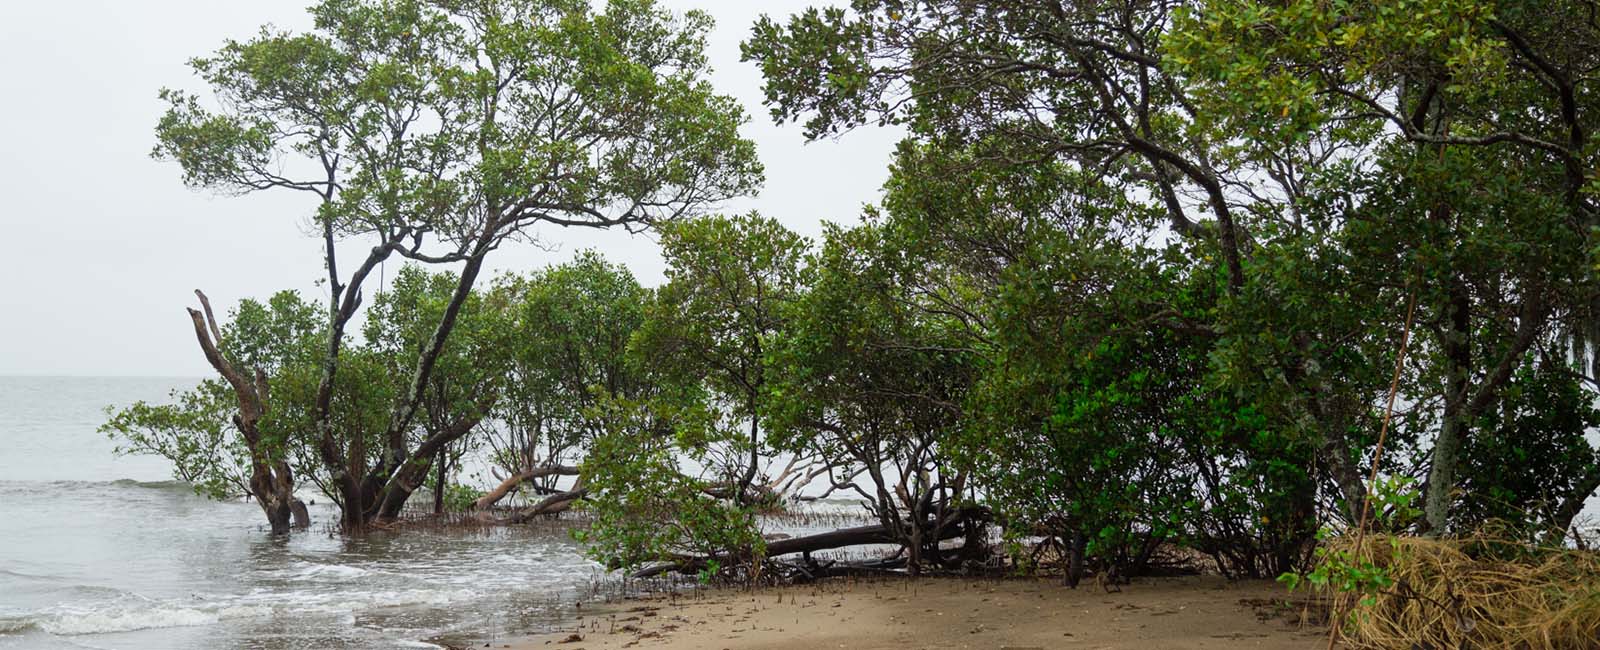 A creek bed with mangroves, trees and other vegetation